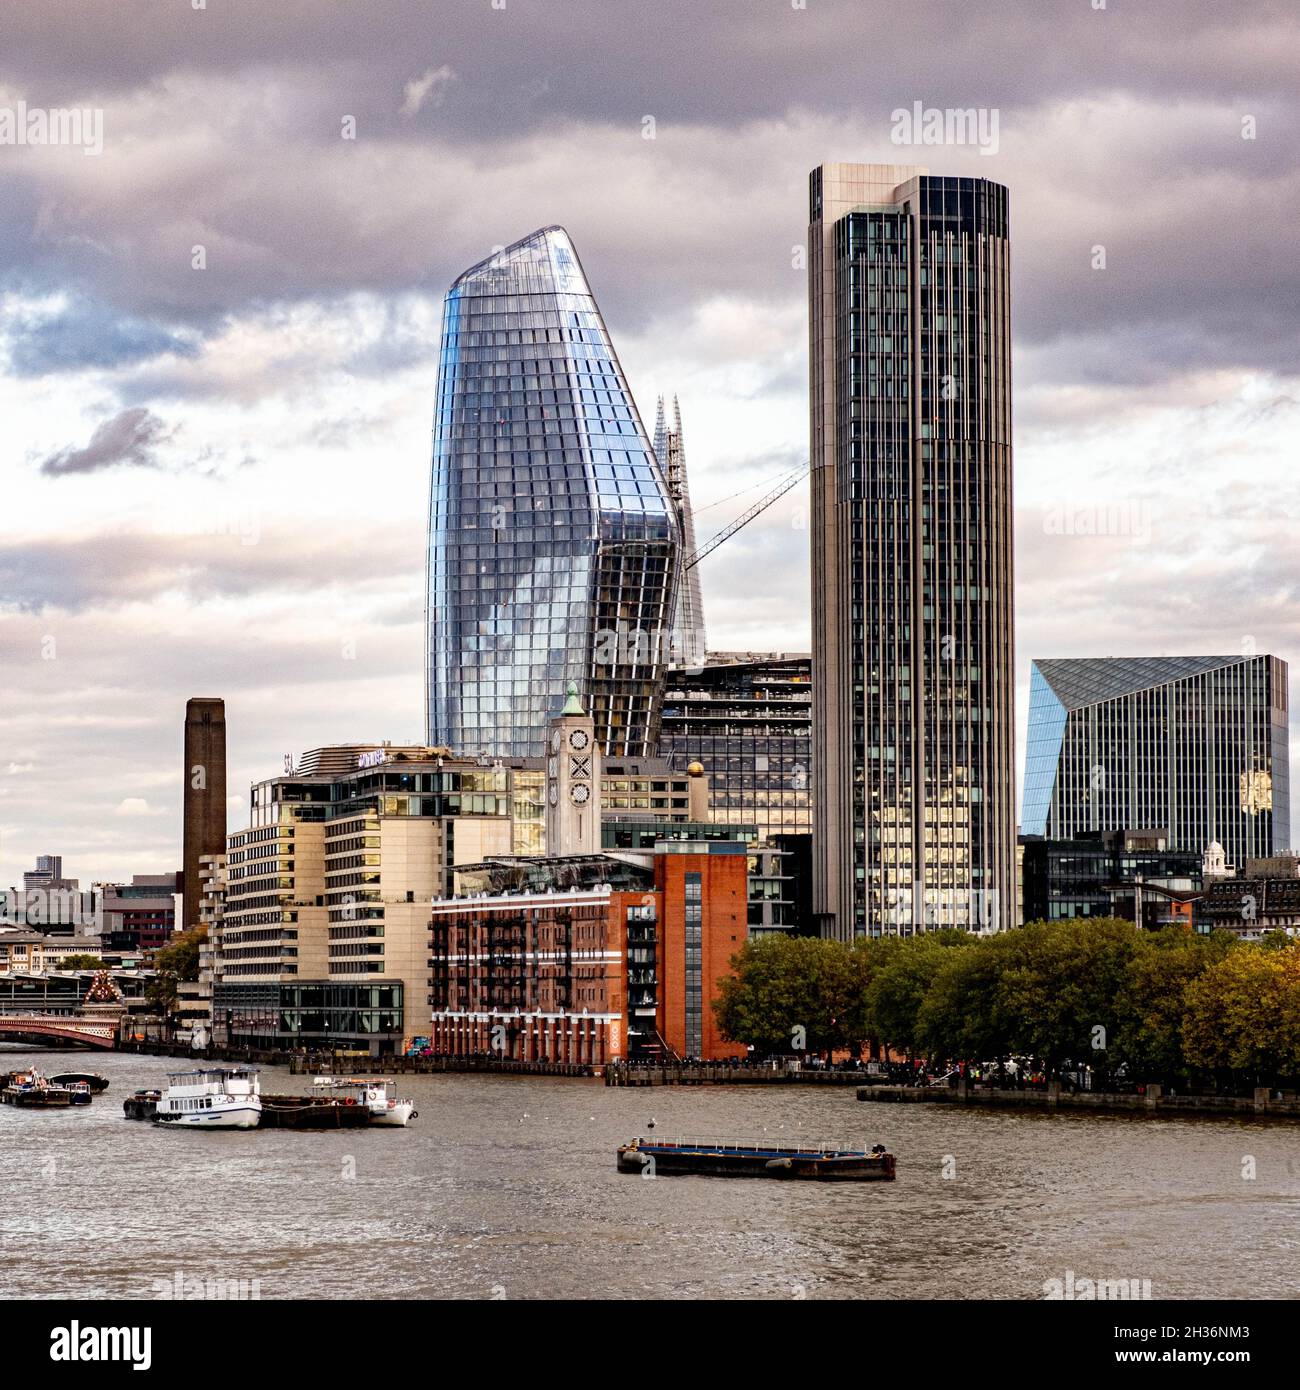 Riverside Development of New Offices and Luxury Apartments in South Bank London Inghilterra UK affacciato sul Tamigi Foto Stock